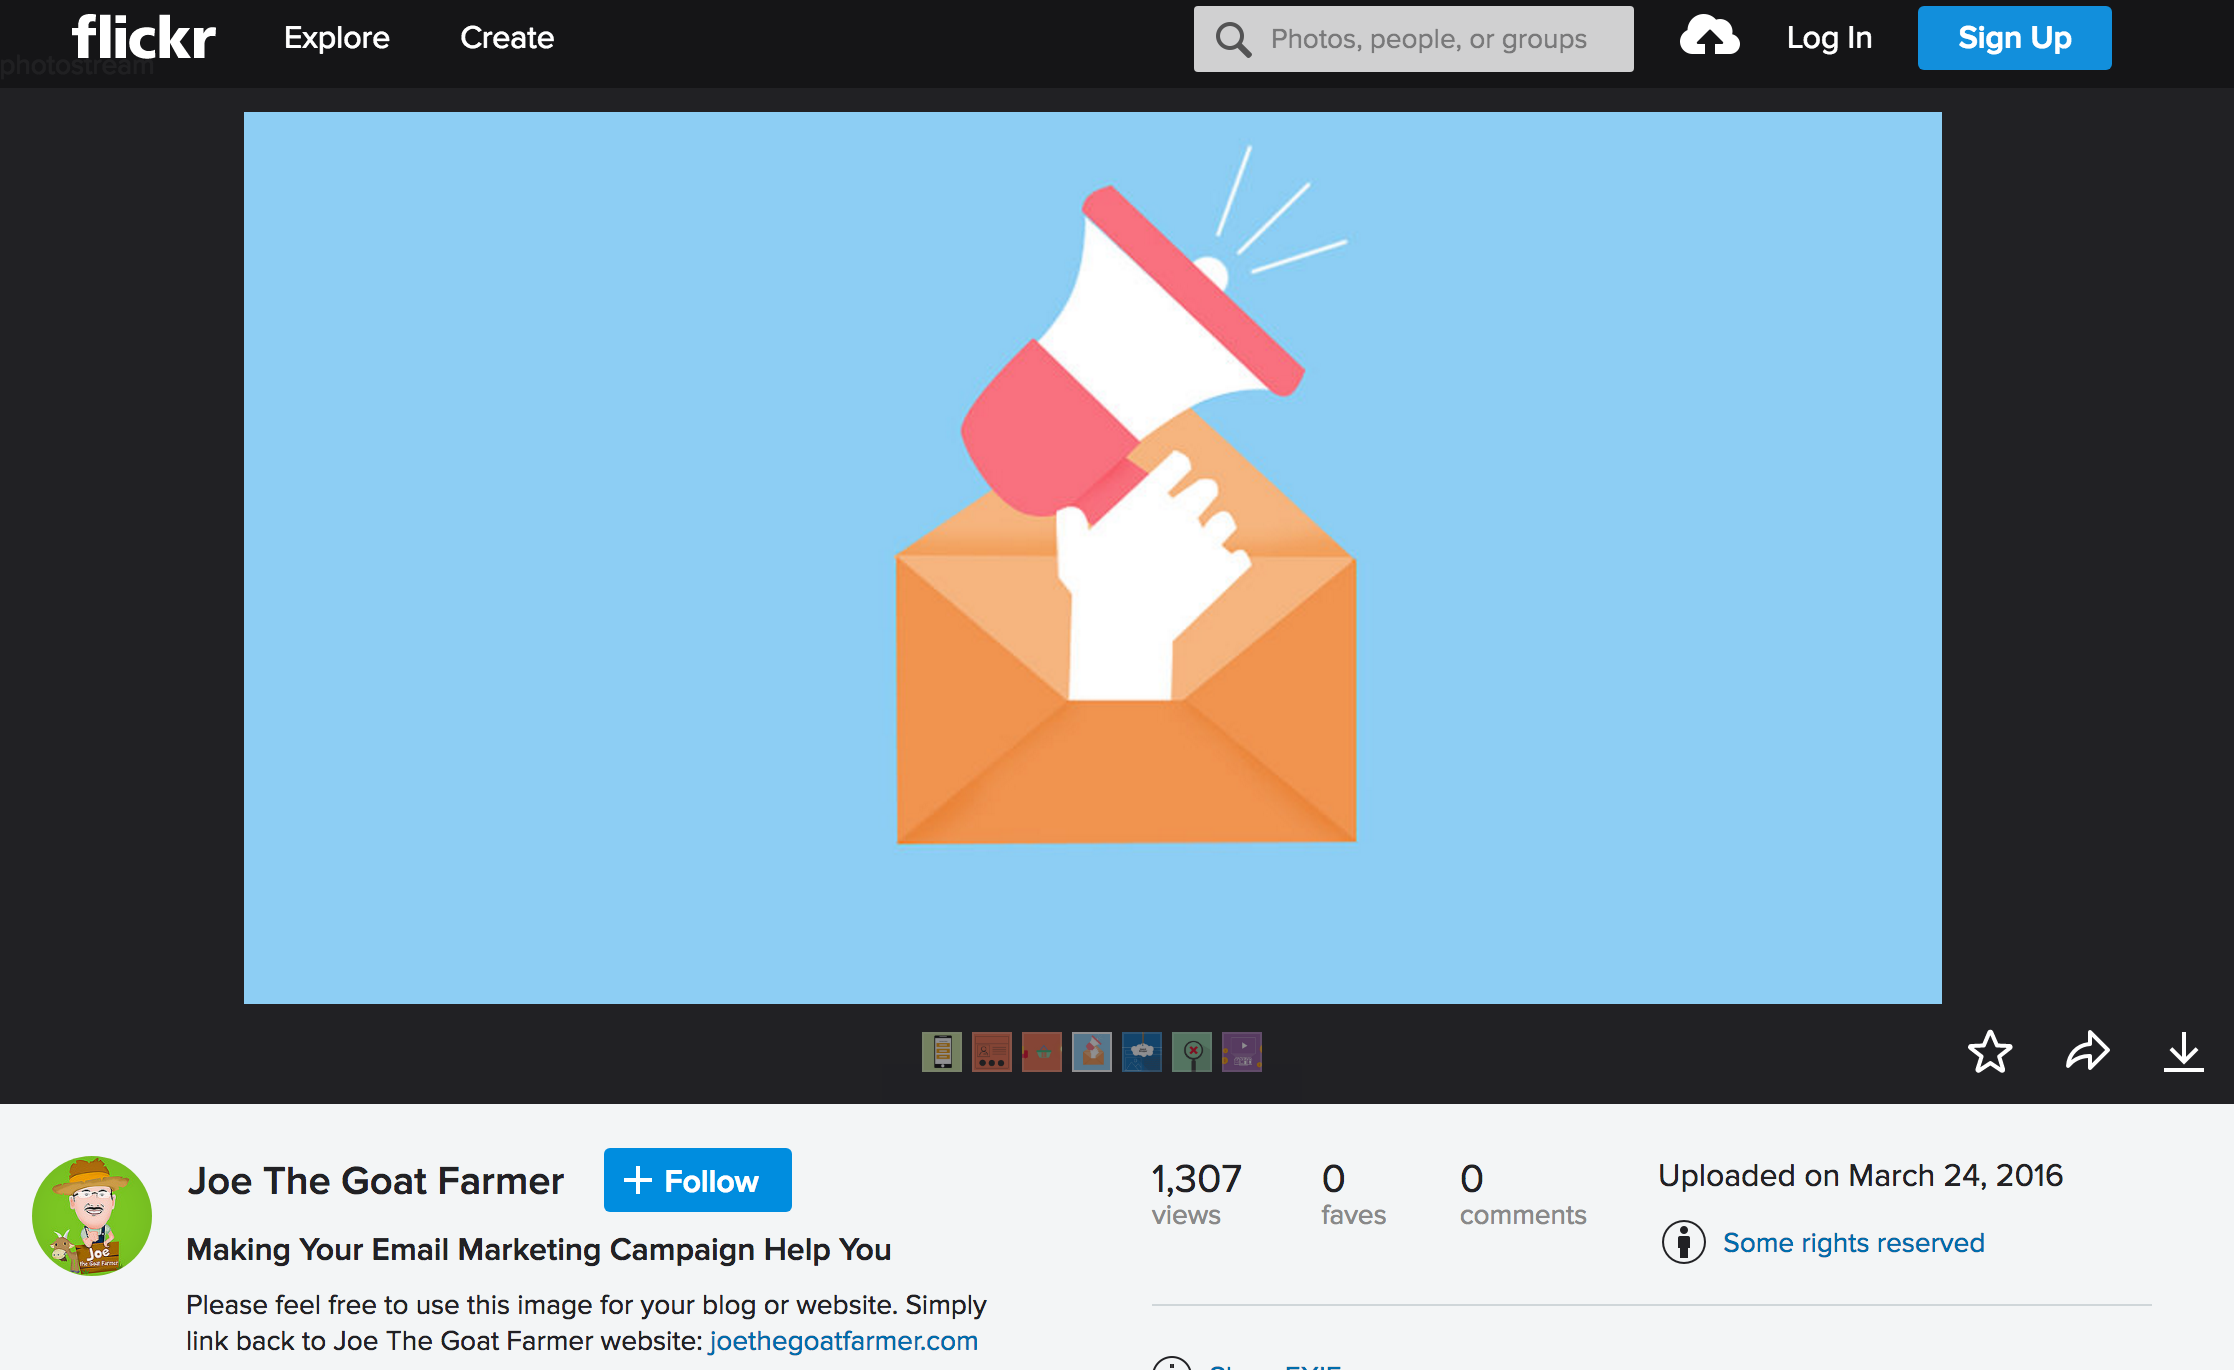 Screenshot of a marketing image uploaded to Flickr